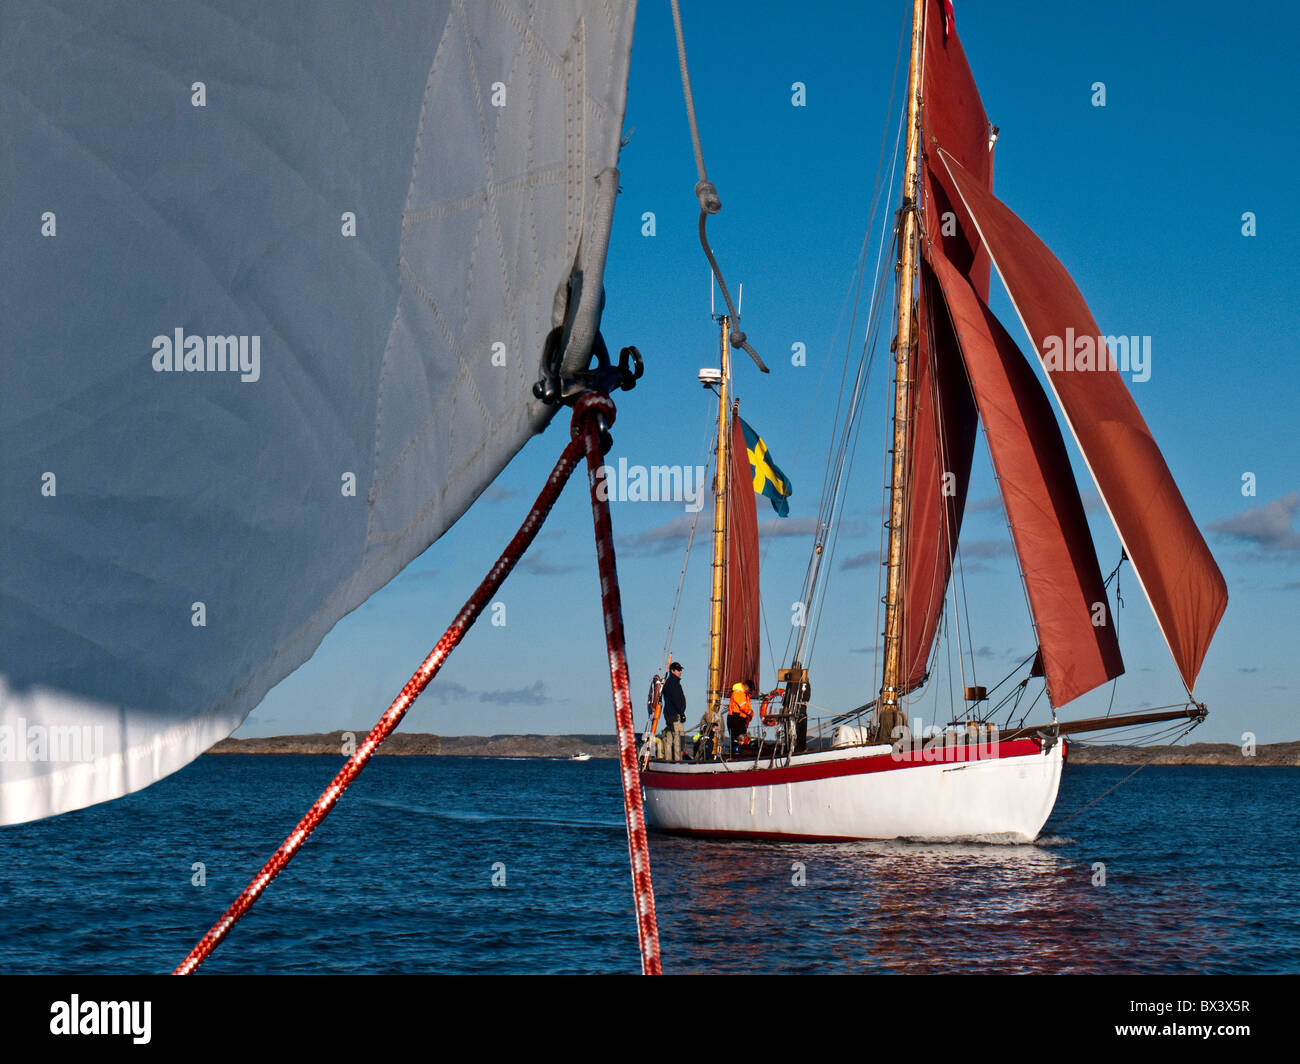 Gaff rig 2 masted ketch under sails. Seen from other sailboat perspective. Stock Photo